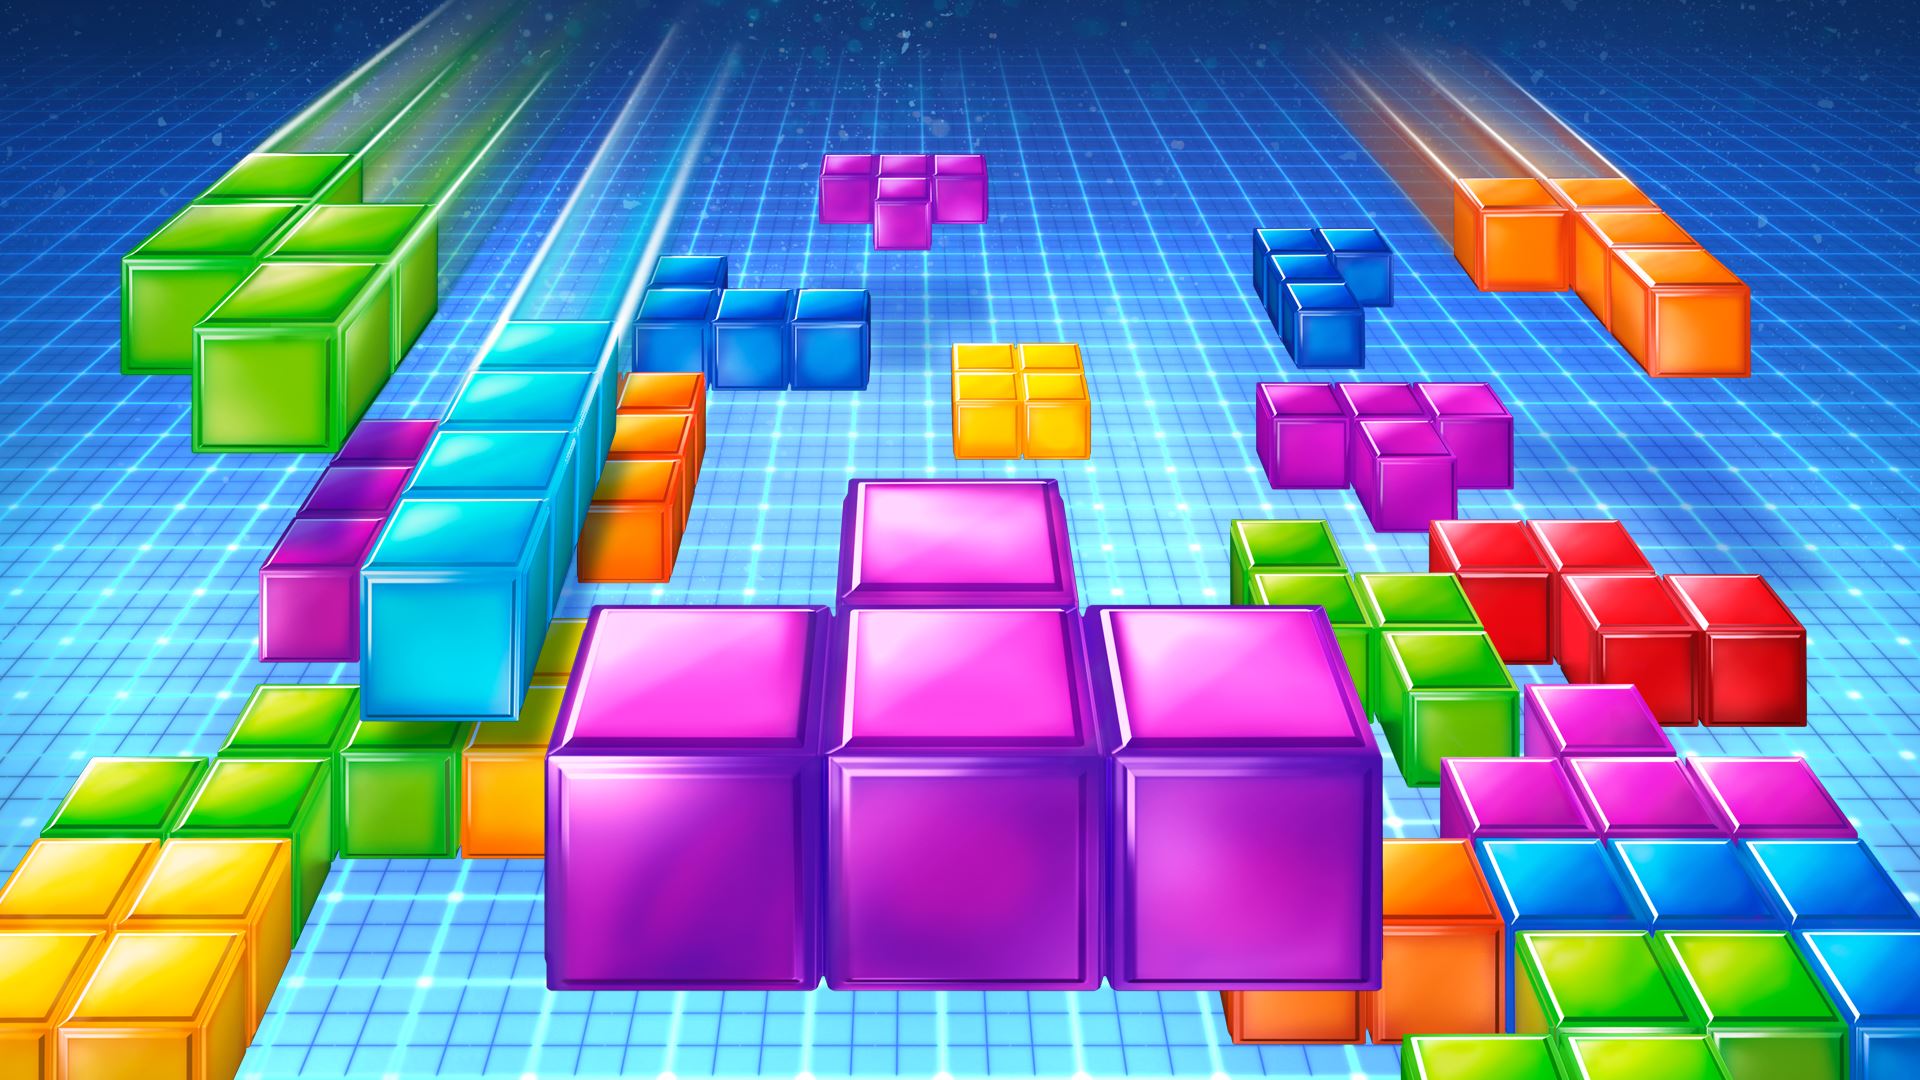 28 Tetris High Resolution Backgrounds GsFDcY 1920x1080